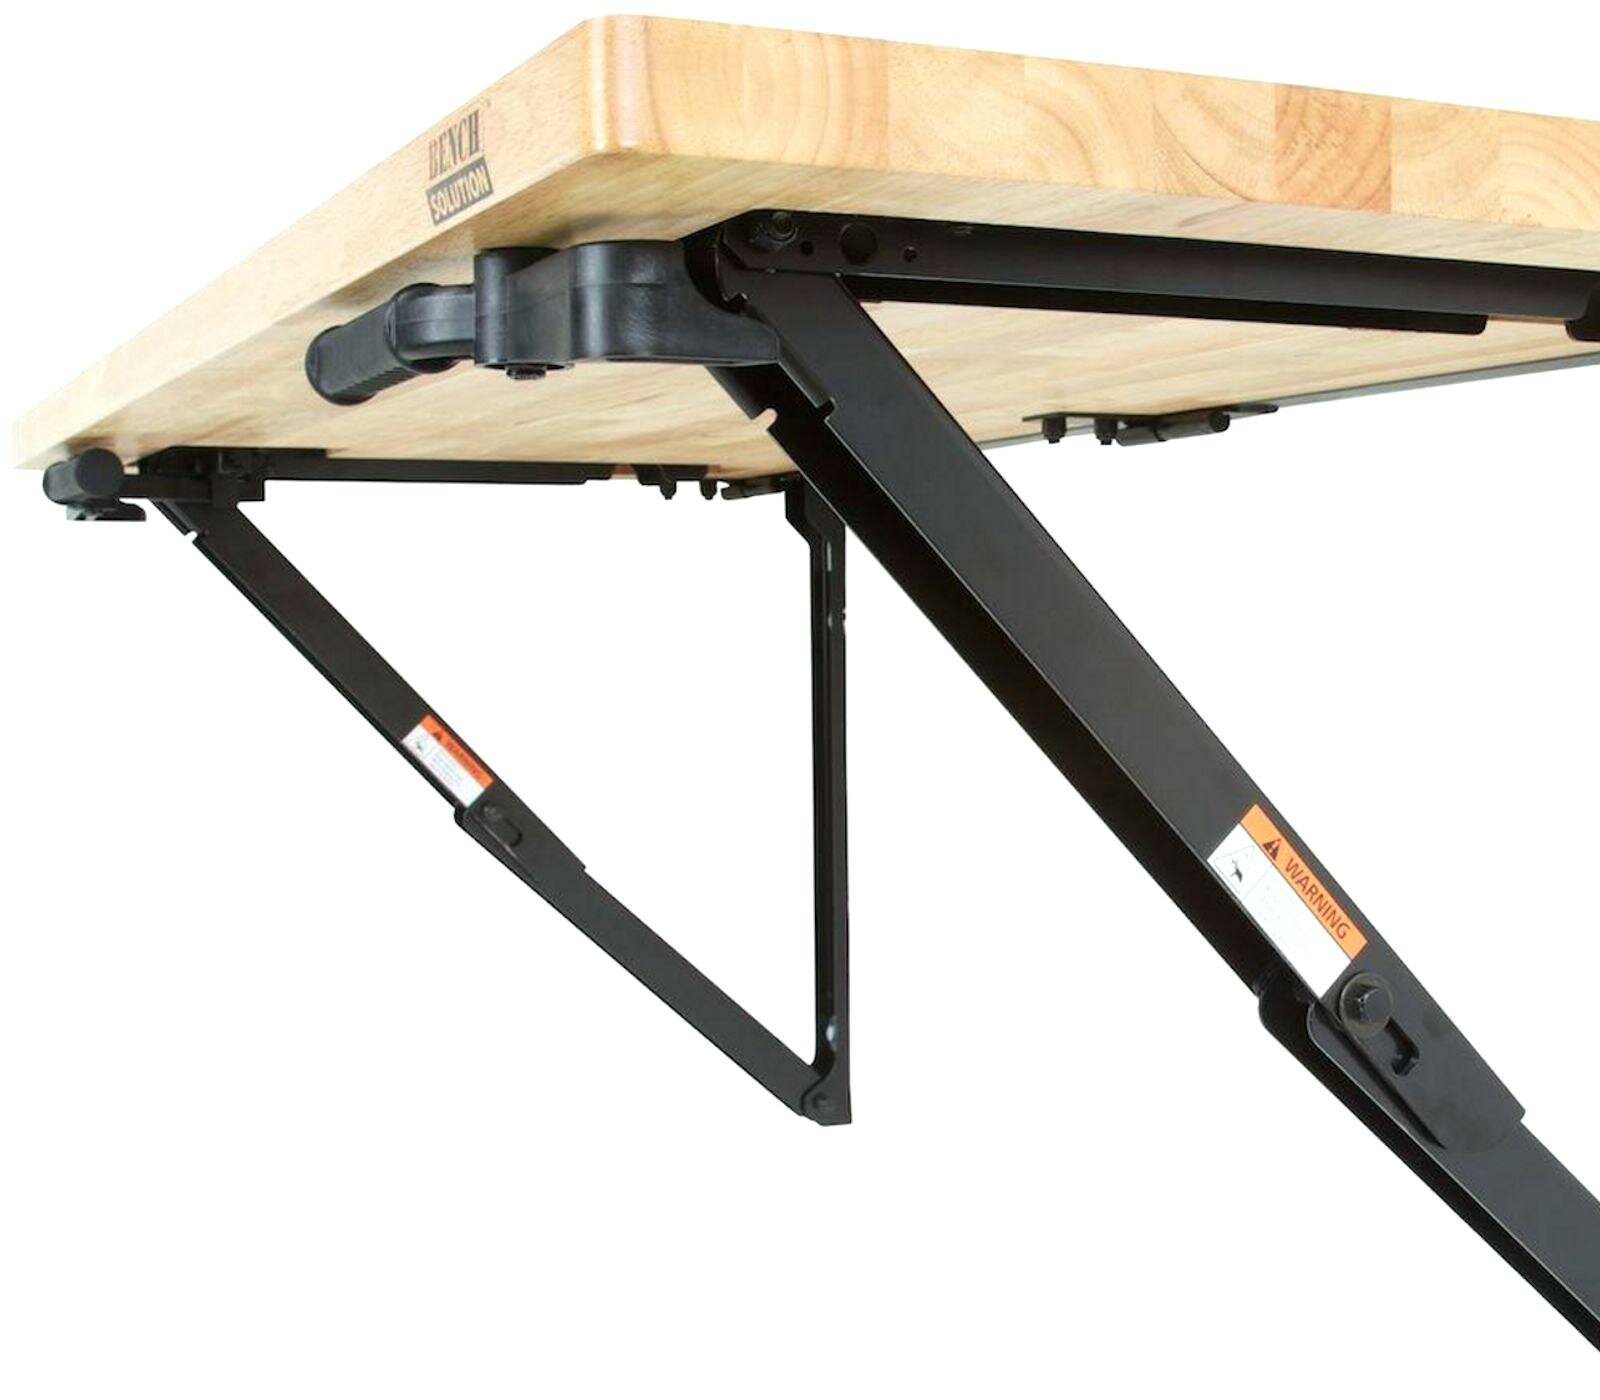 Wall Mounted Folding Workbench for Exciting Workspace Furniture Ideas: Home Depot Folding Workbench | Wall Mounted Folding Workbench | Bench Solution Folding Workbench